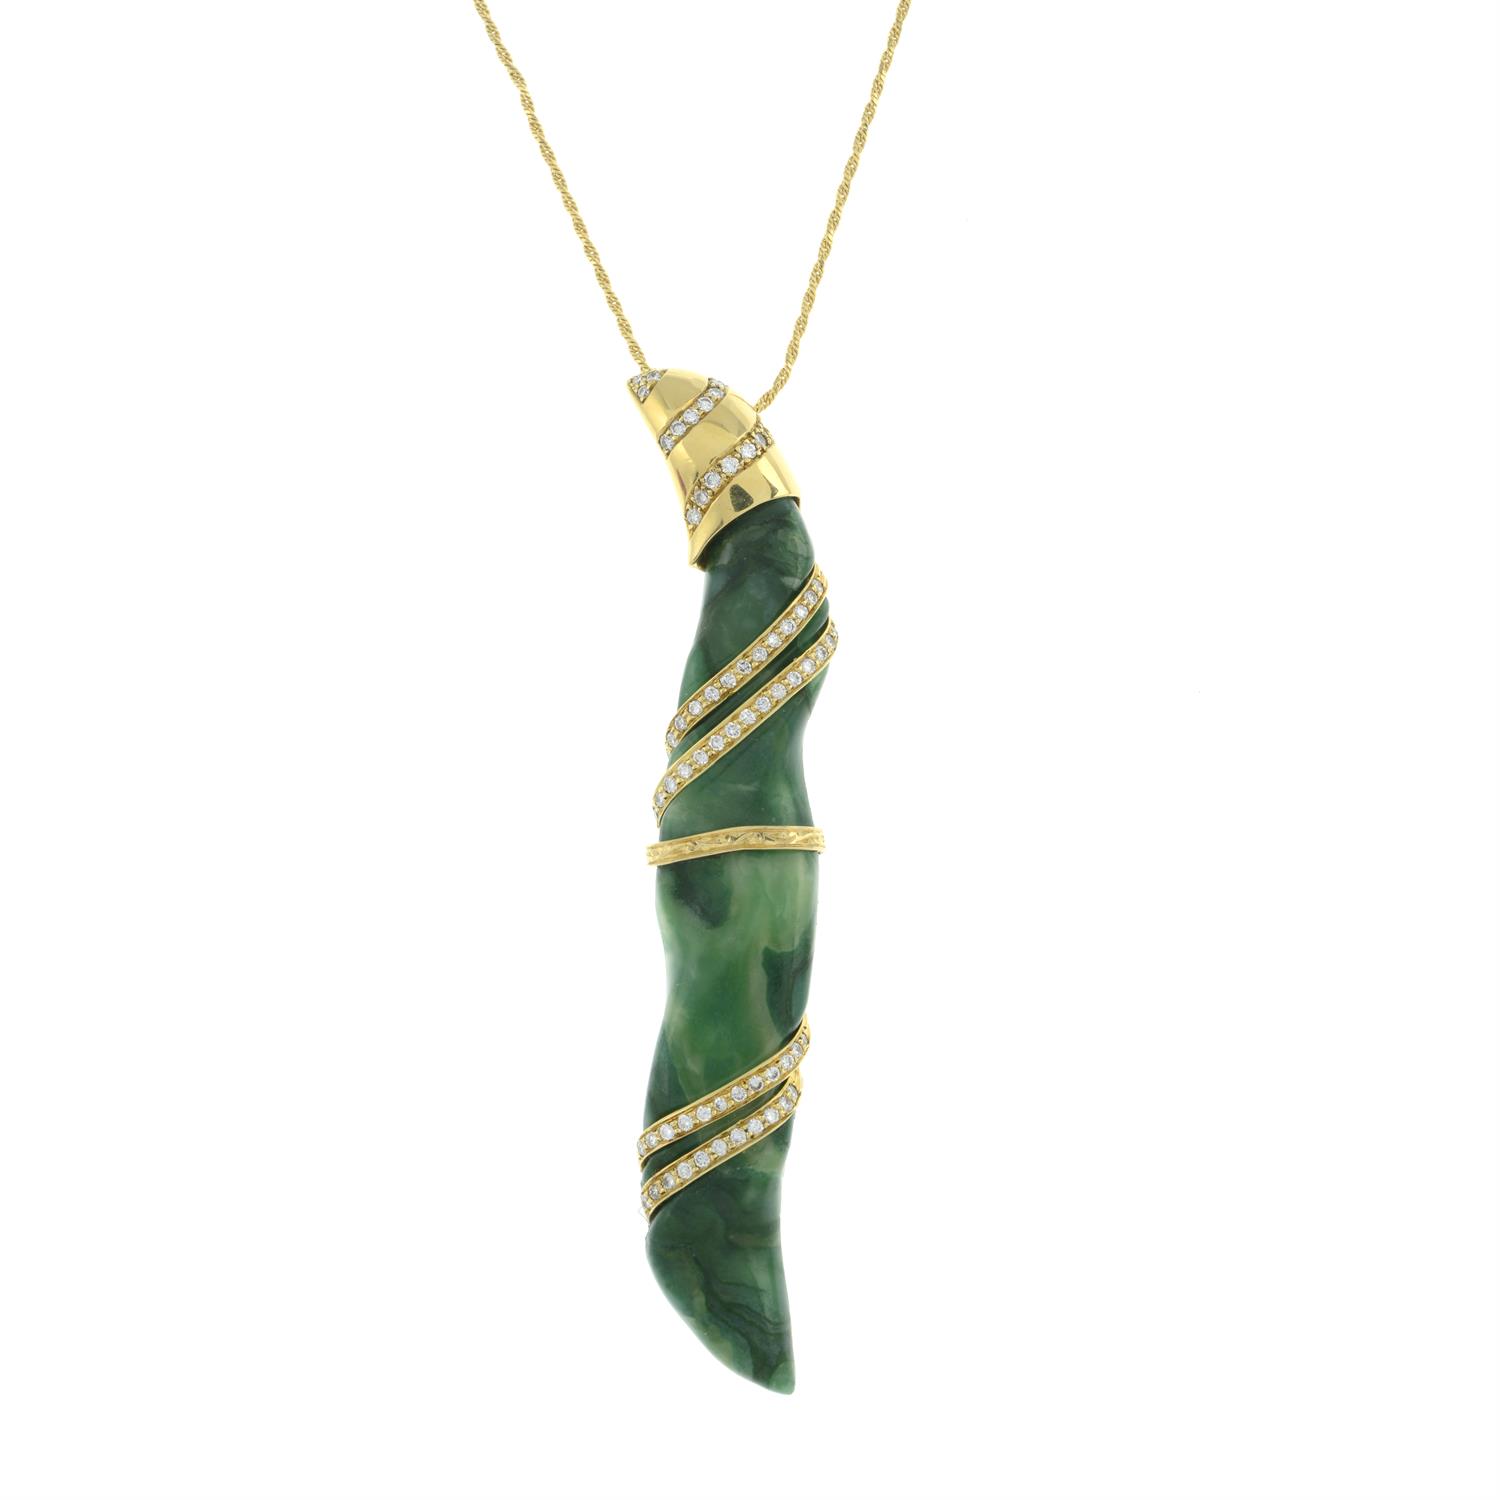 18ct gold diamond and green stone pendant, with chain - Image 2 of 5